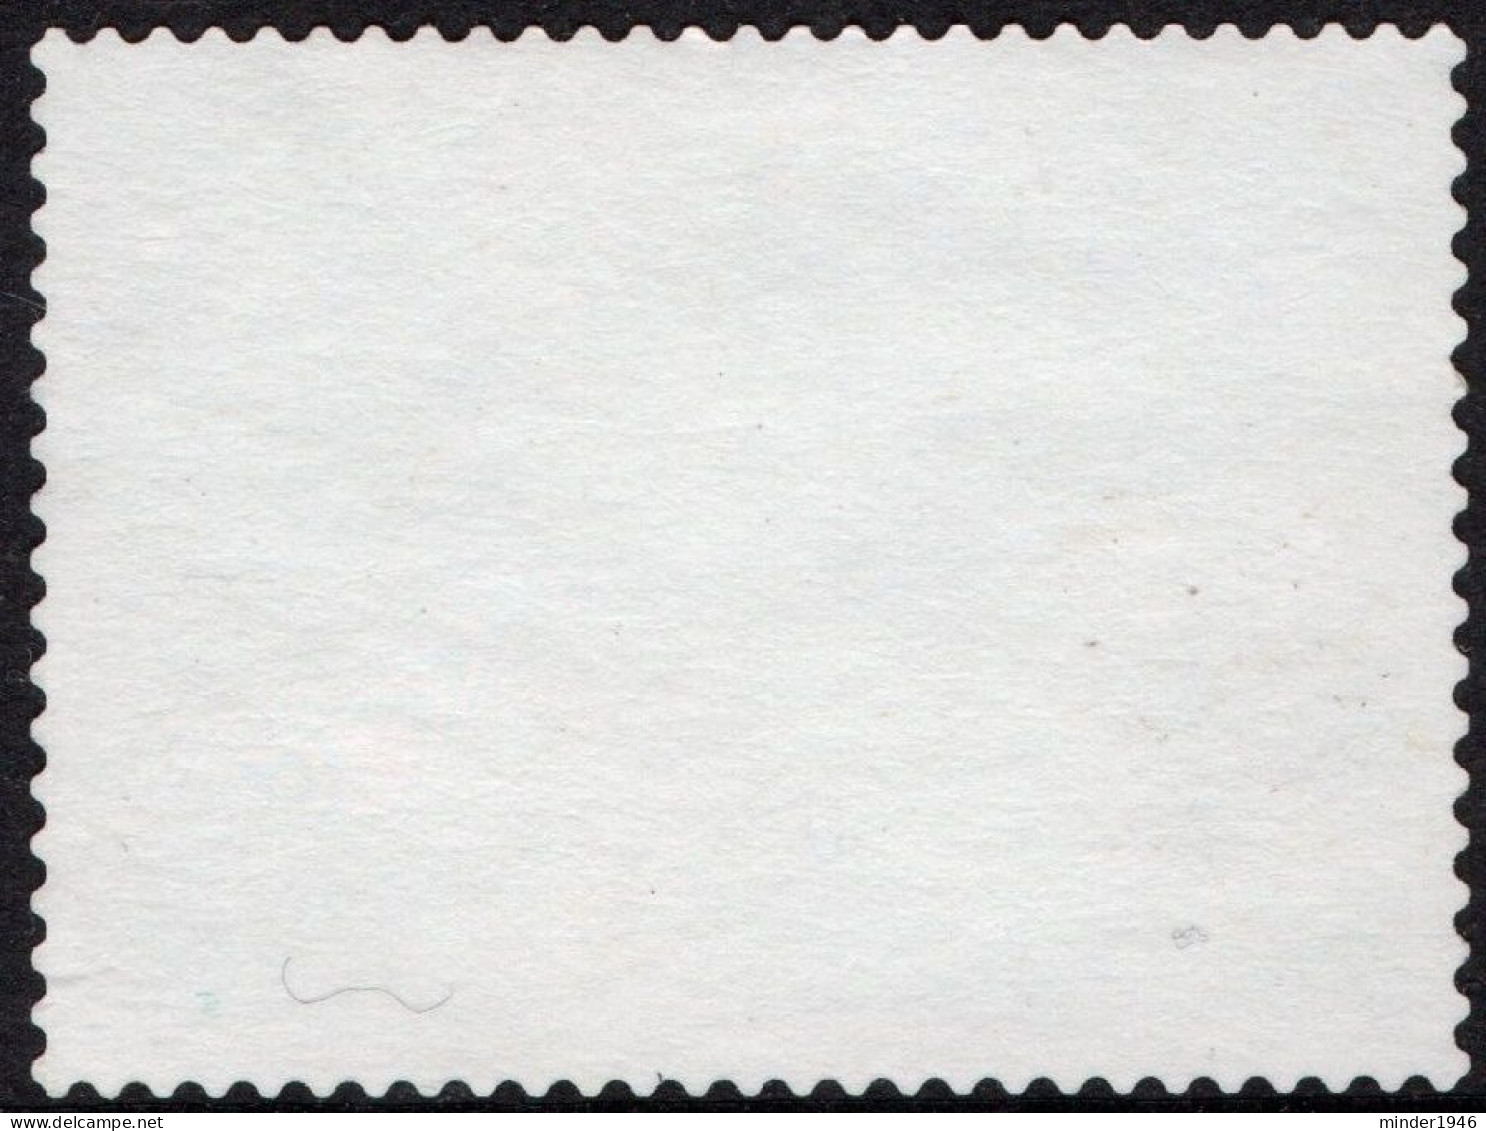 GREAT BRITAIN 2001 QEII 1st Black & Grey, Cats & Dogs-Cat Behind Curtain SG2193 Used - Used Stamps